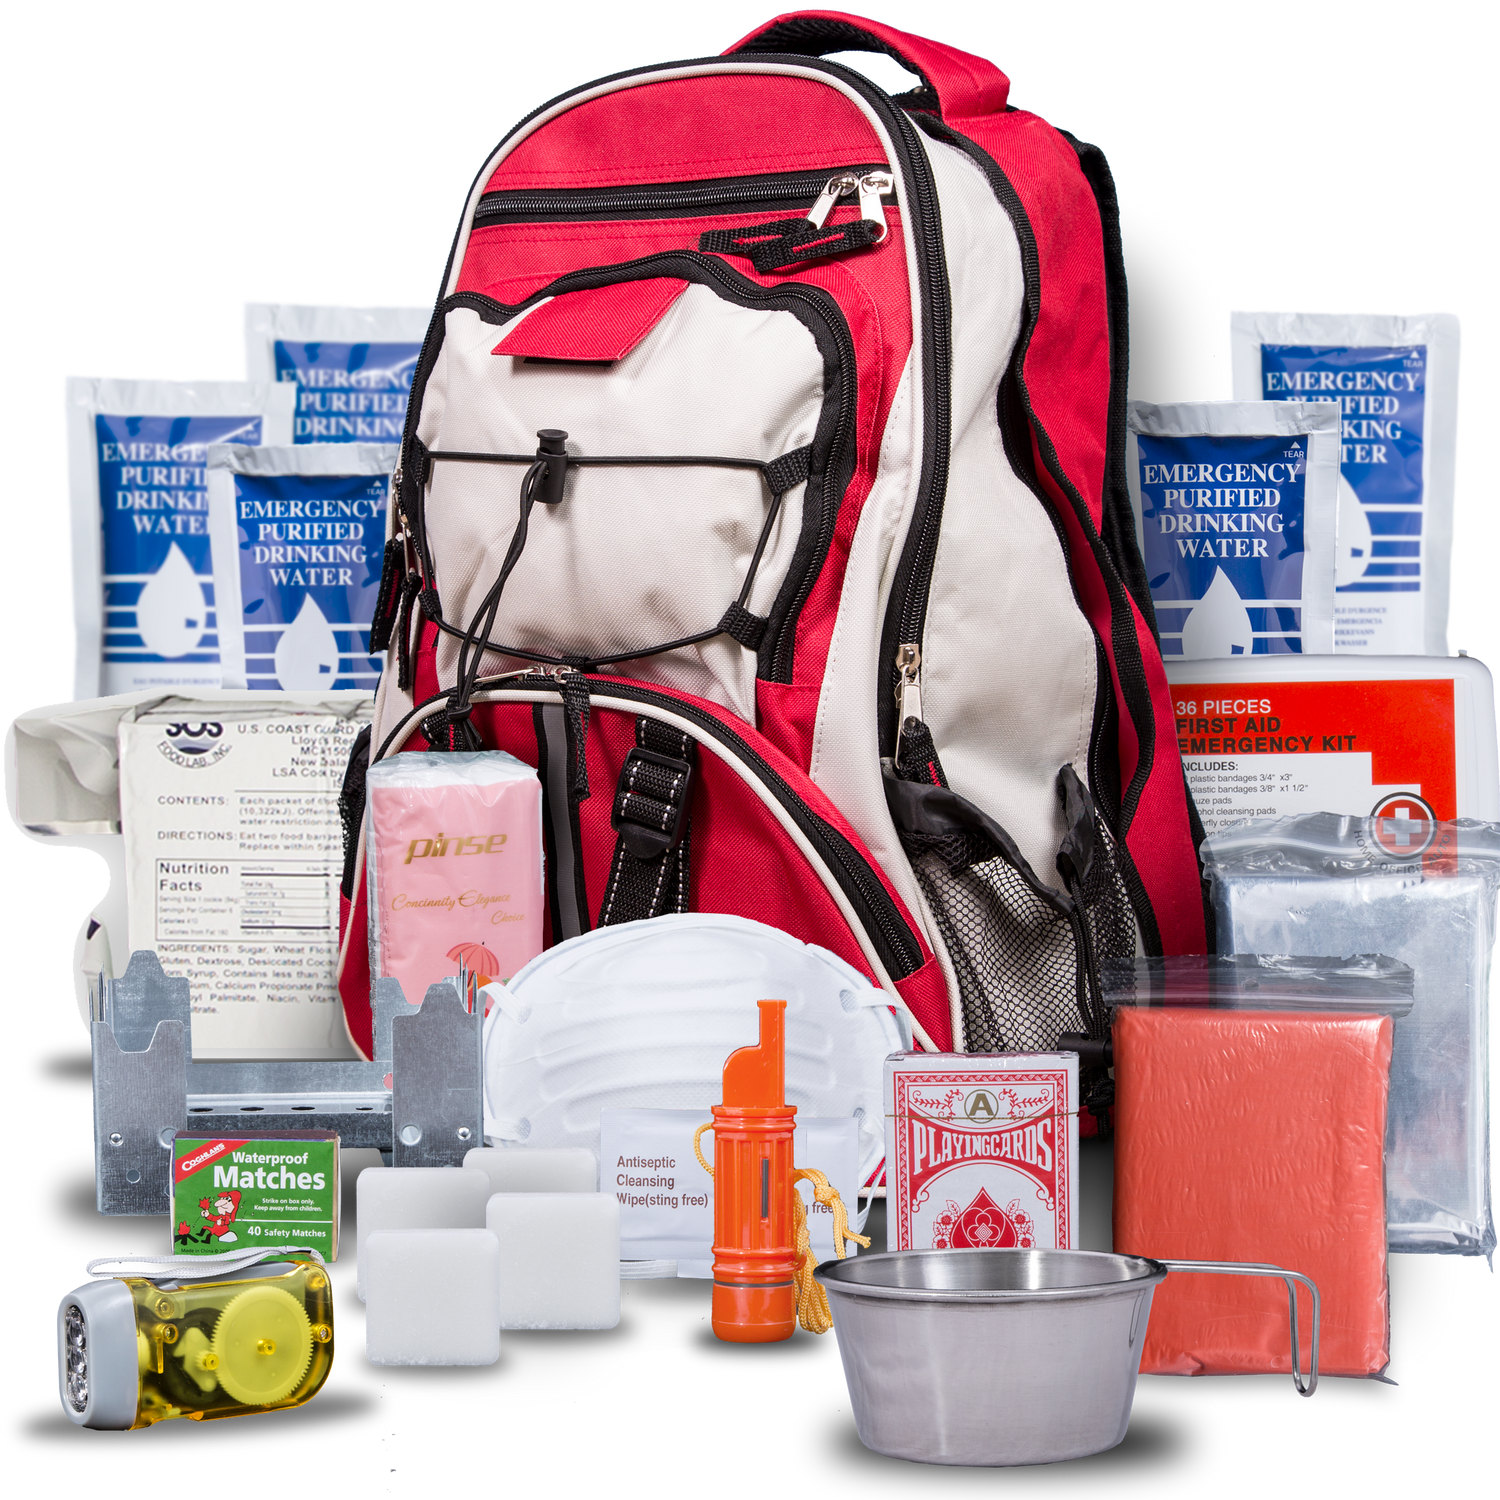 Blue Seventy-Two PRO SERIES - Deluxe 3 Day Emergency Kit for 1 Person